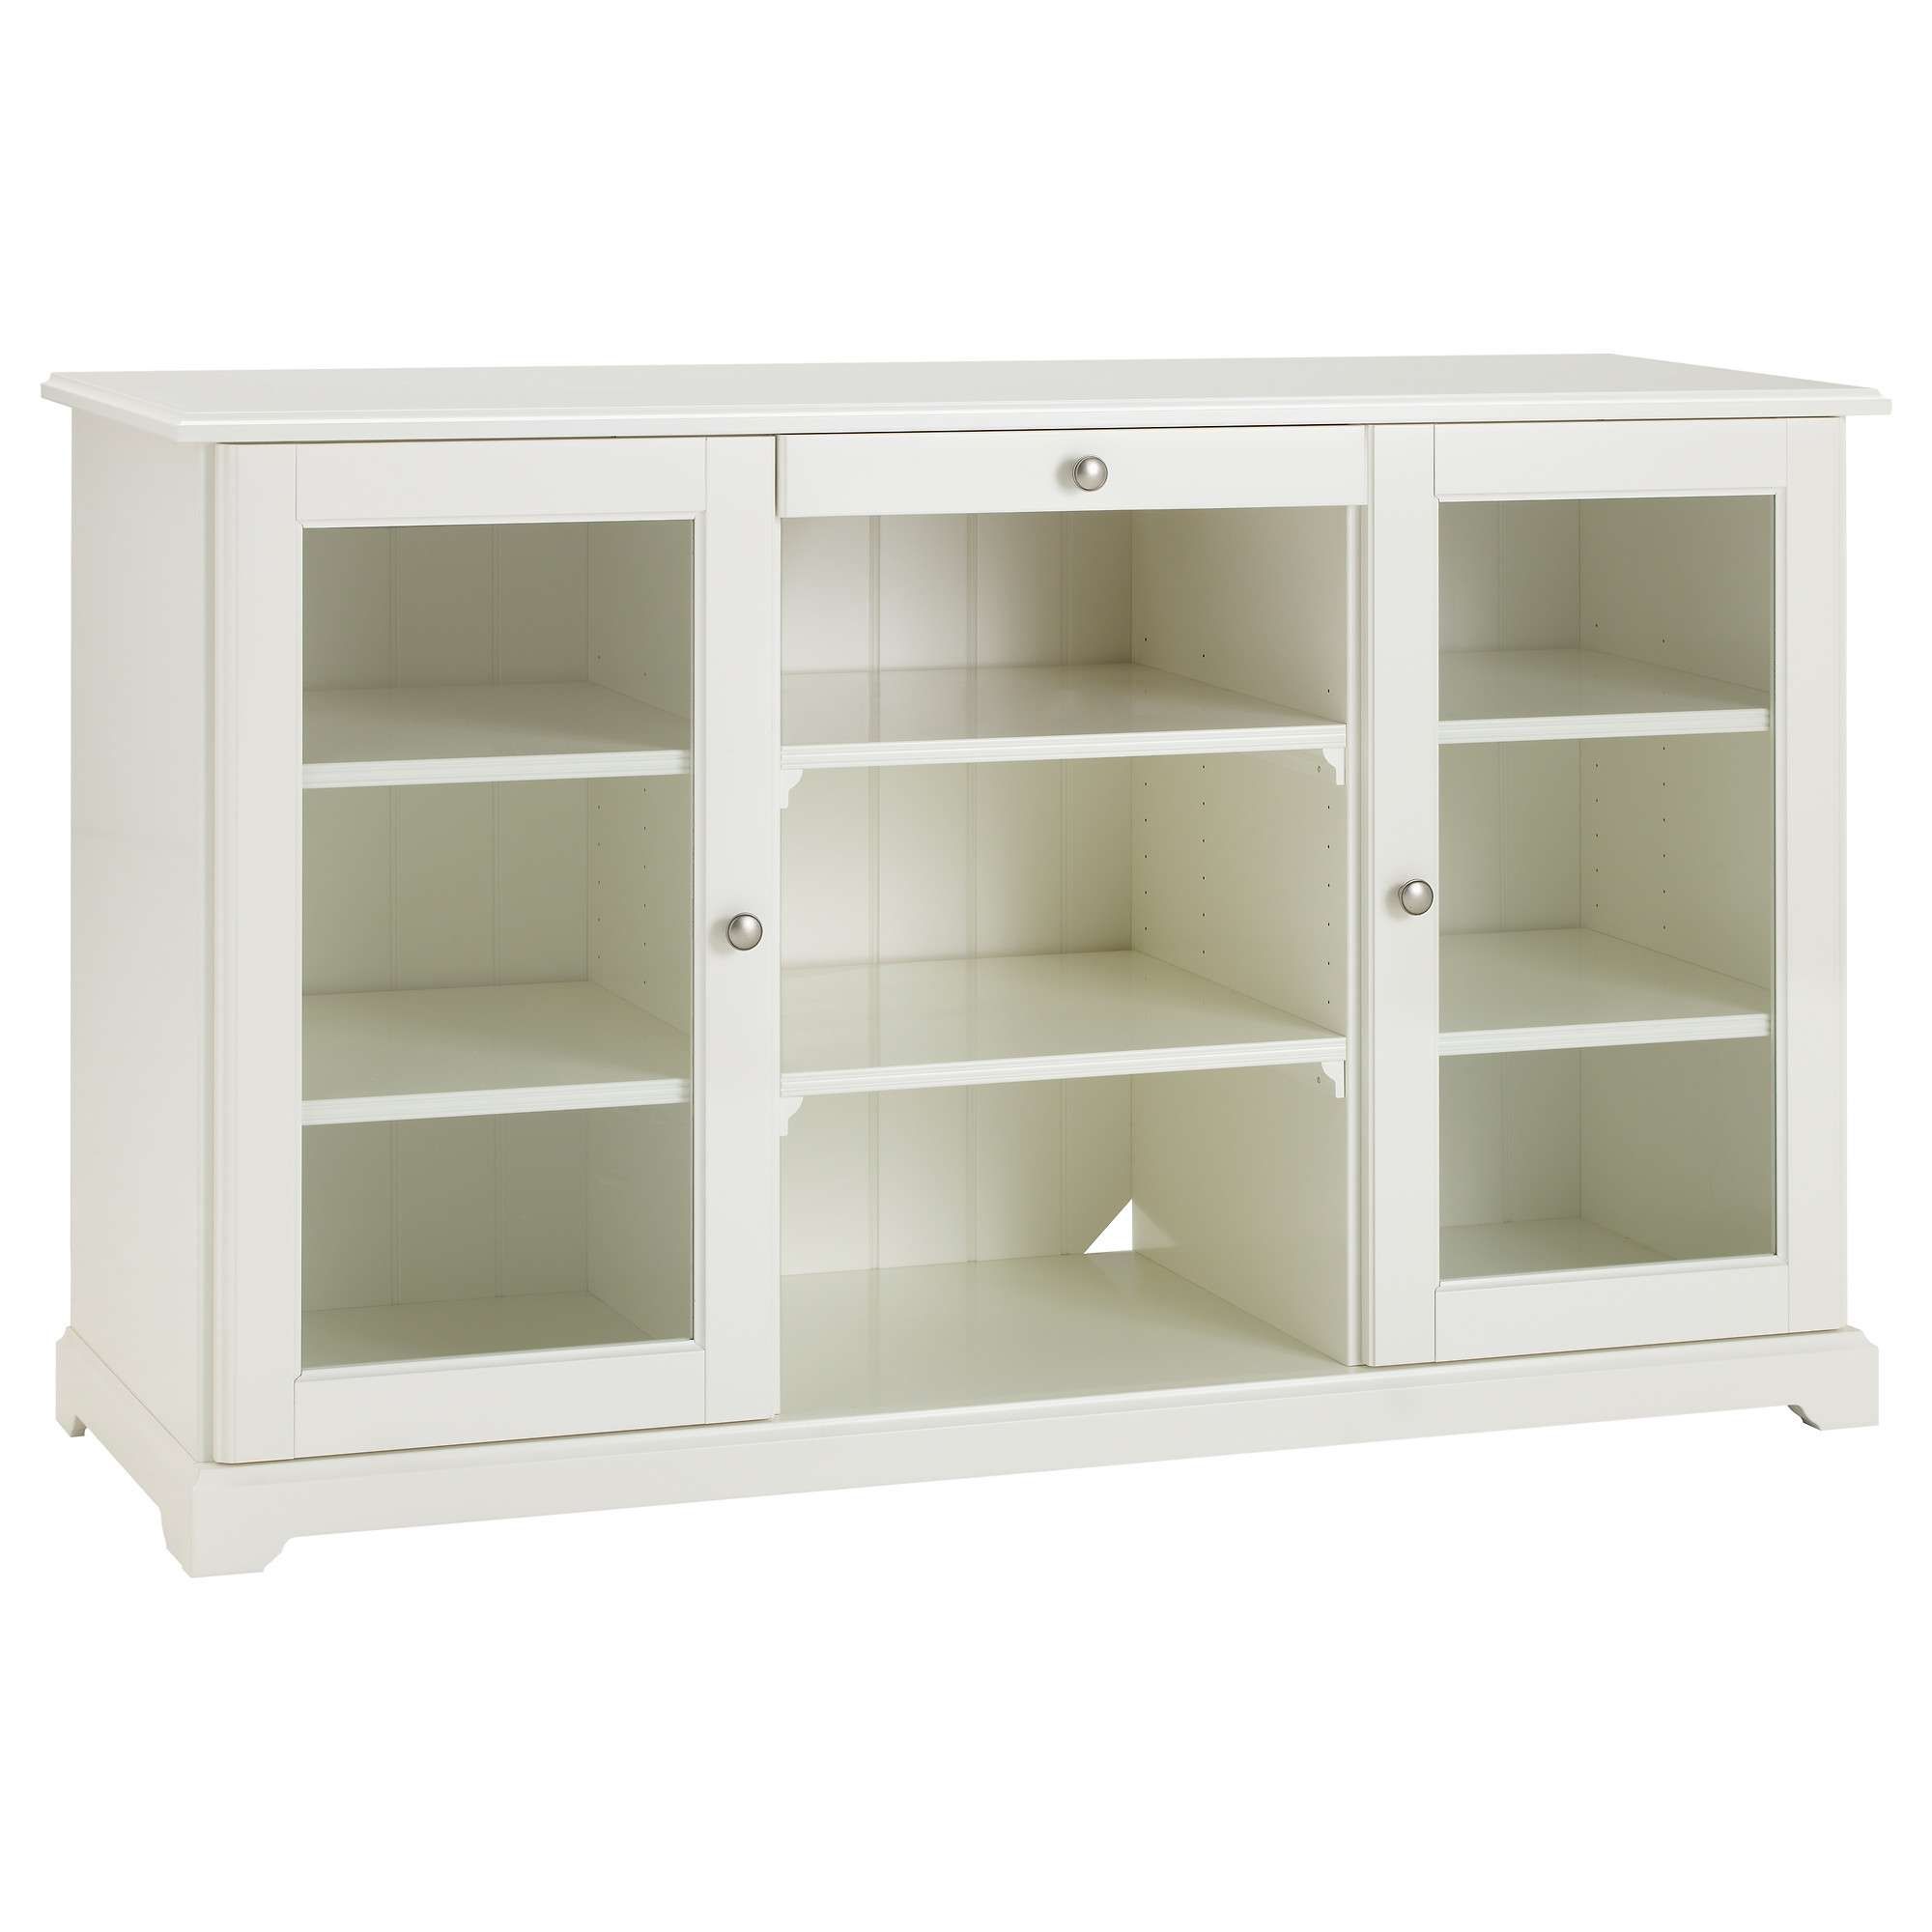 Liatorp Sideboard – White – Ikea For Liatorp Sideboards (View 2 of 20)